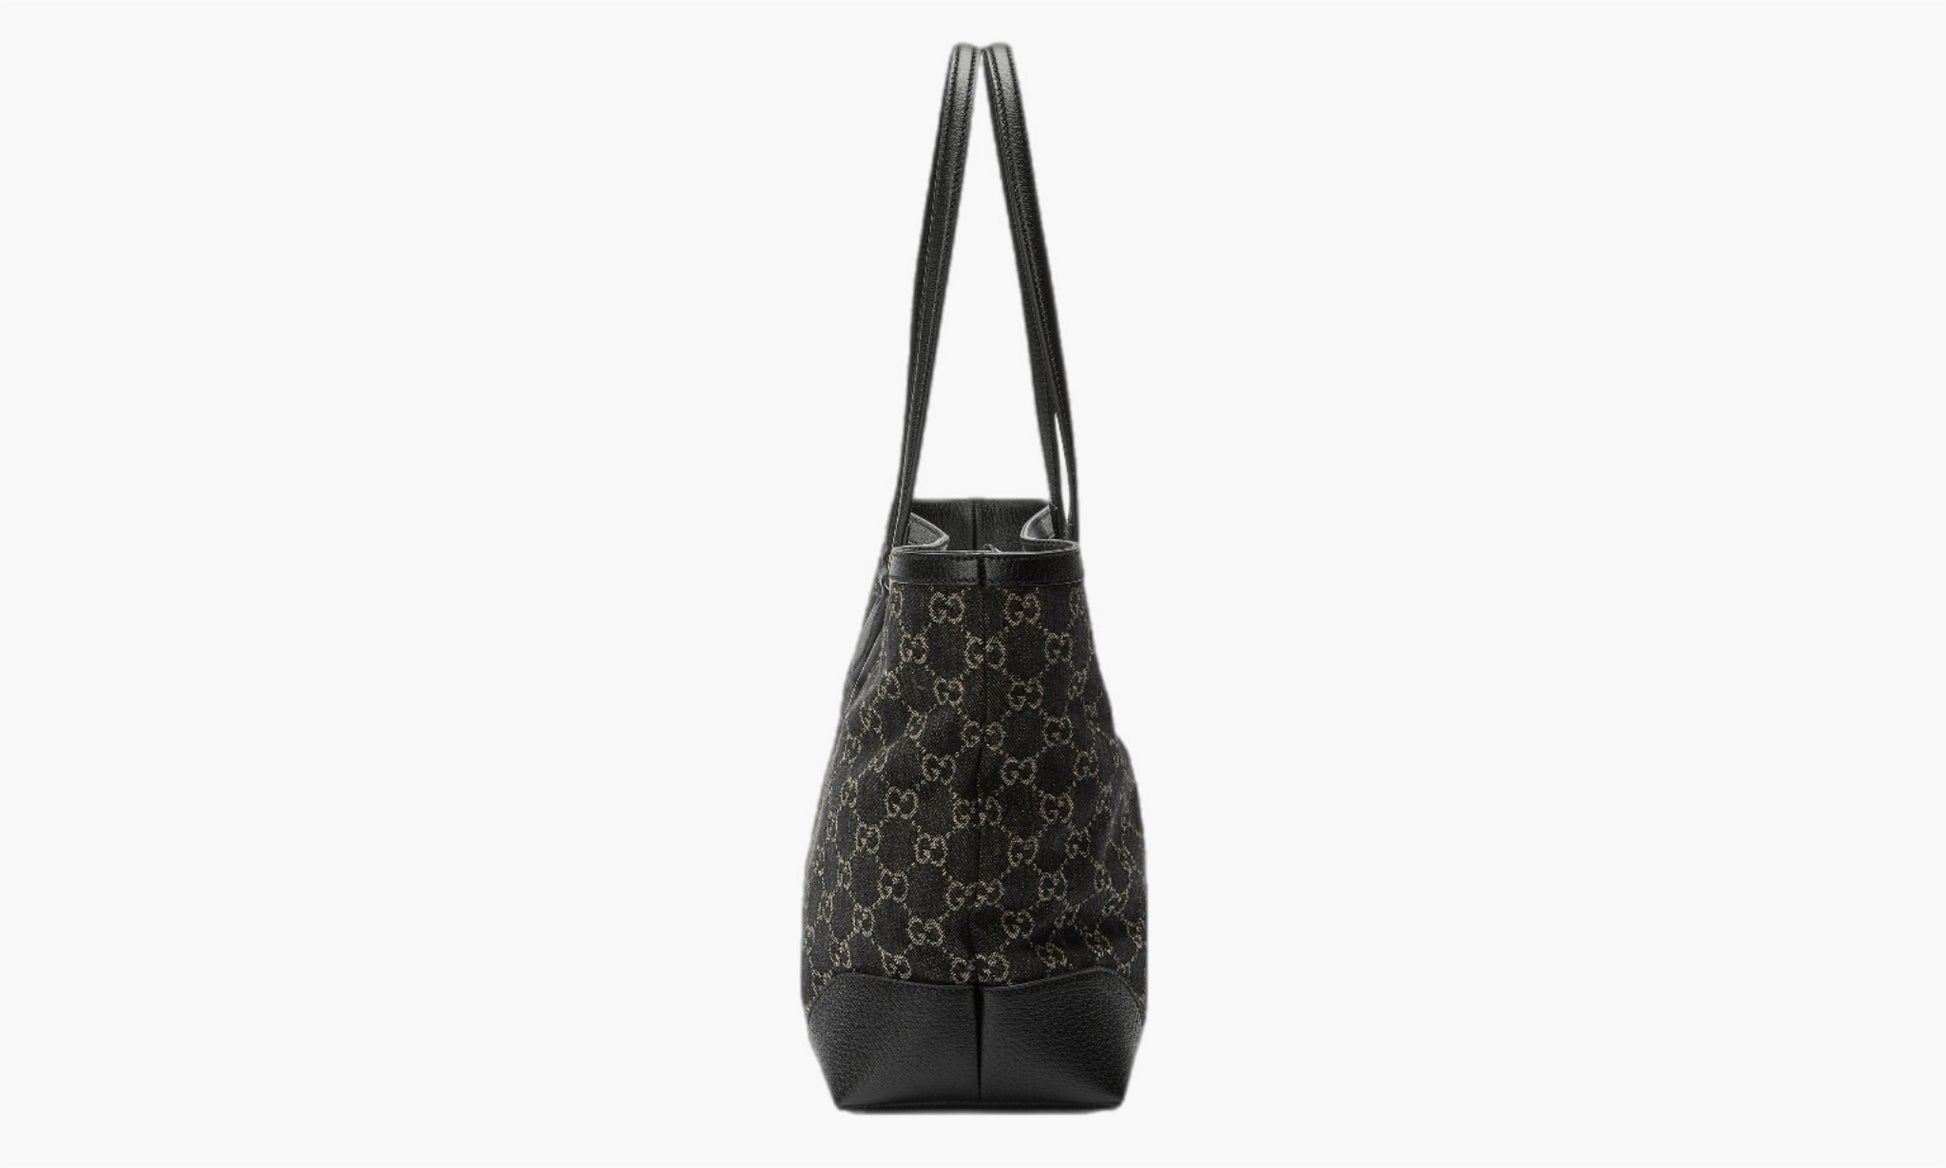 Gucci Ophidia Tote Bag Grey/Black | The Sortage